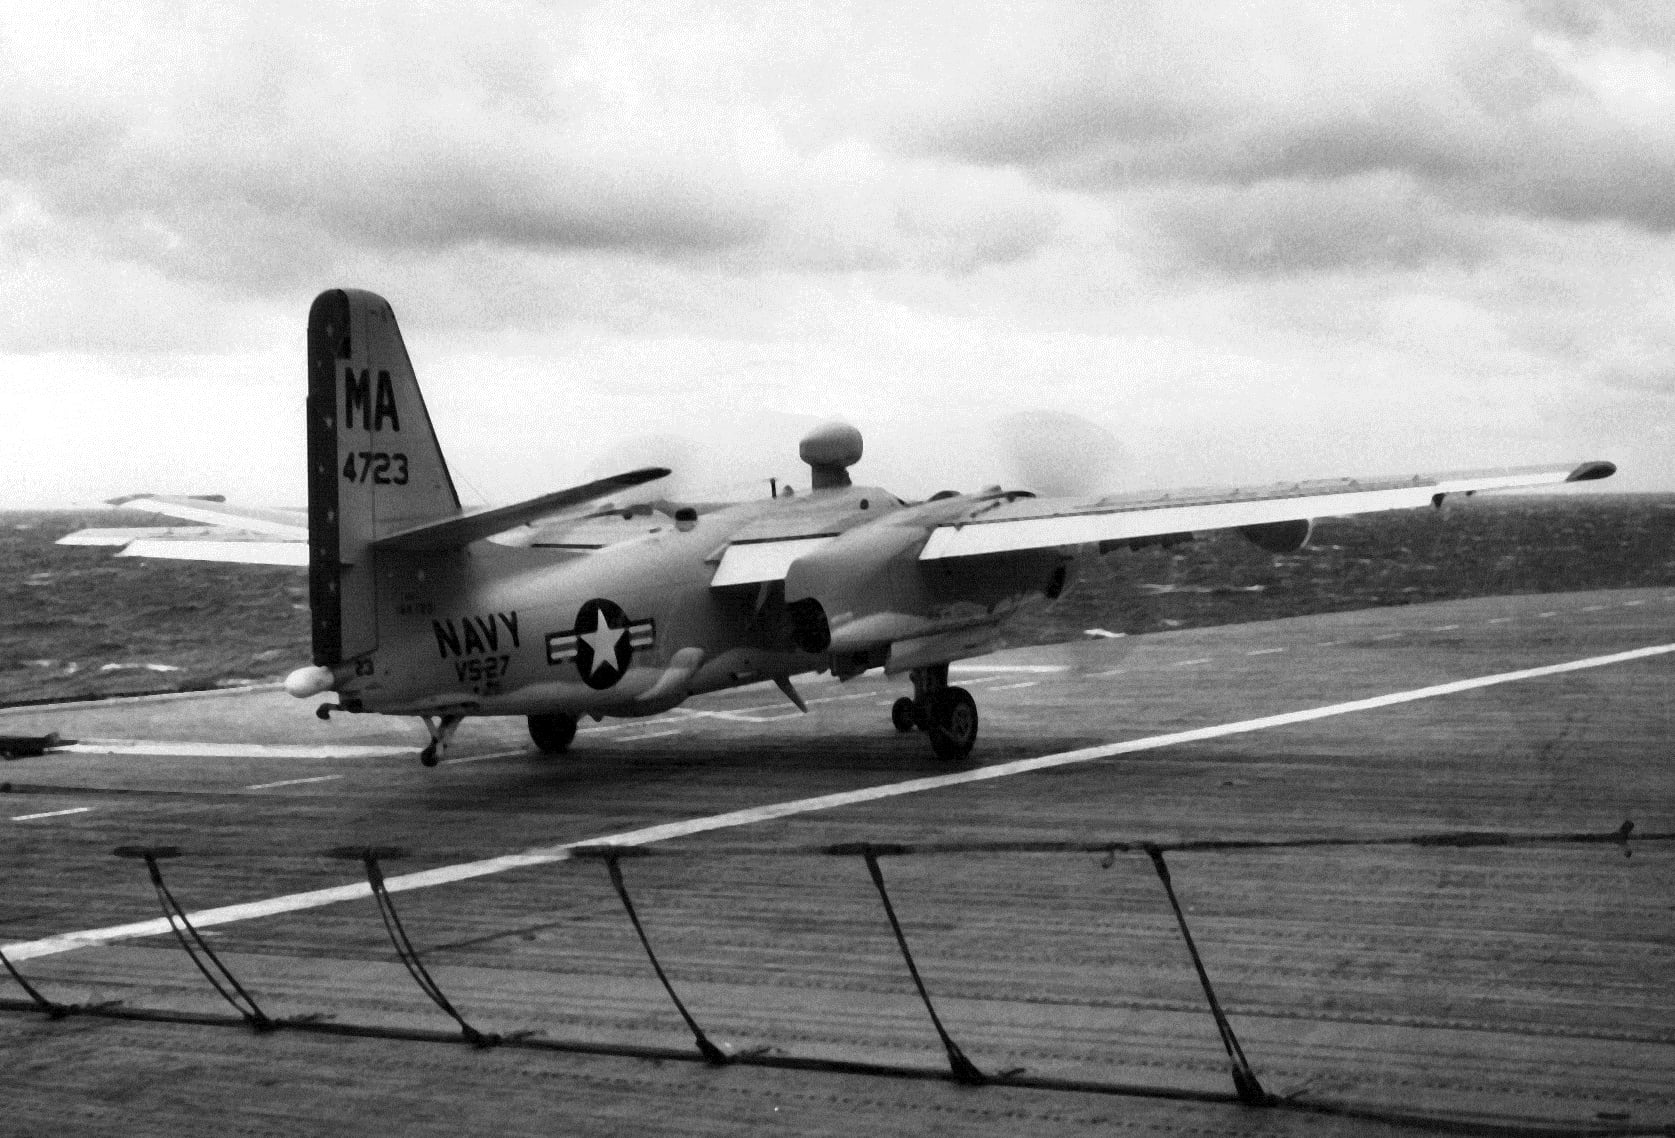 S-2 preparing to take off from a carrier.